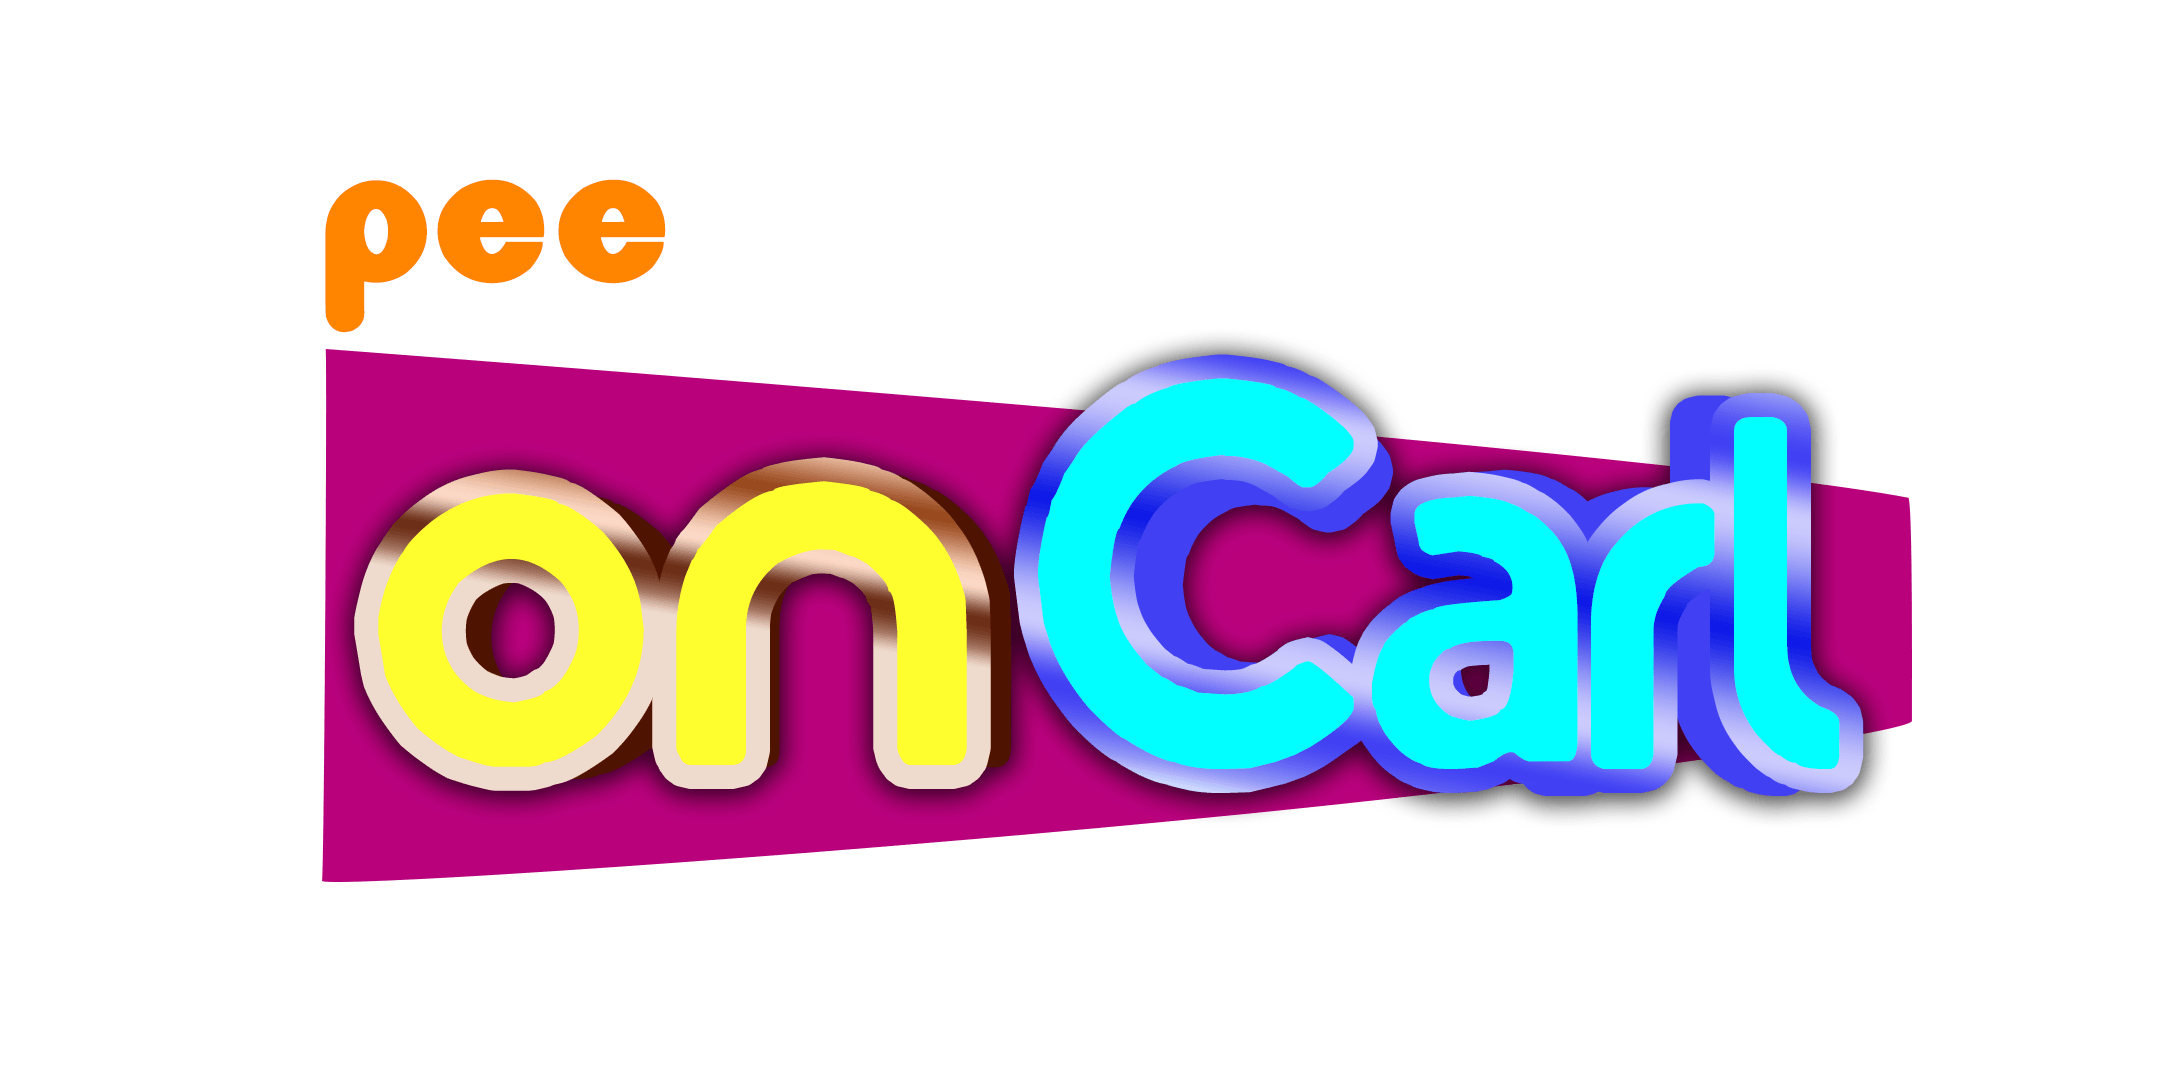 iCarly Logo - please go online to icarly.com